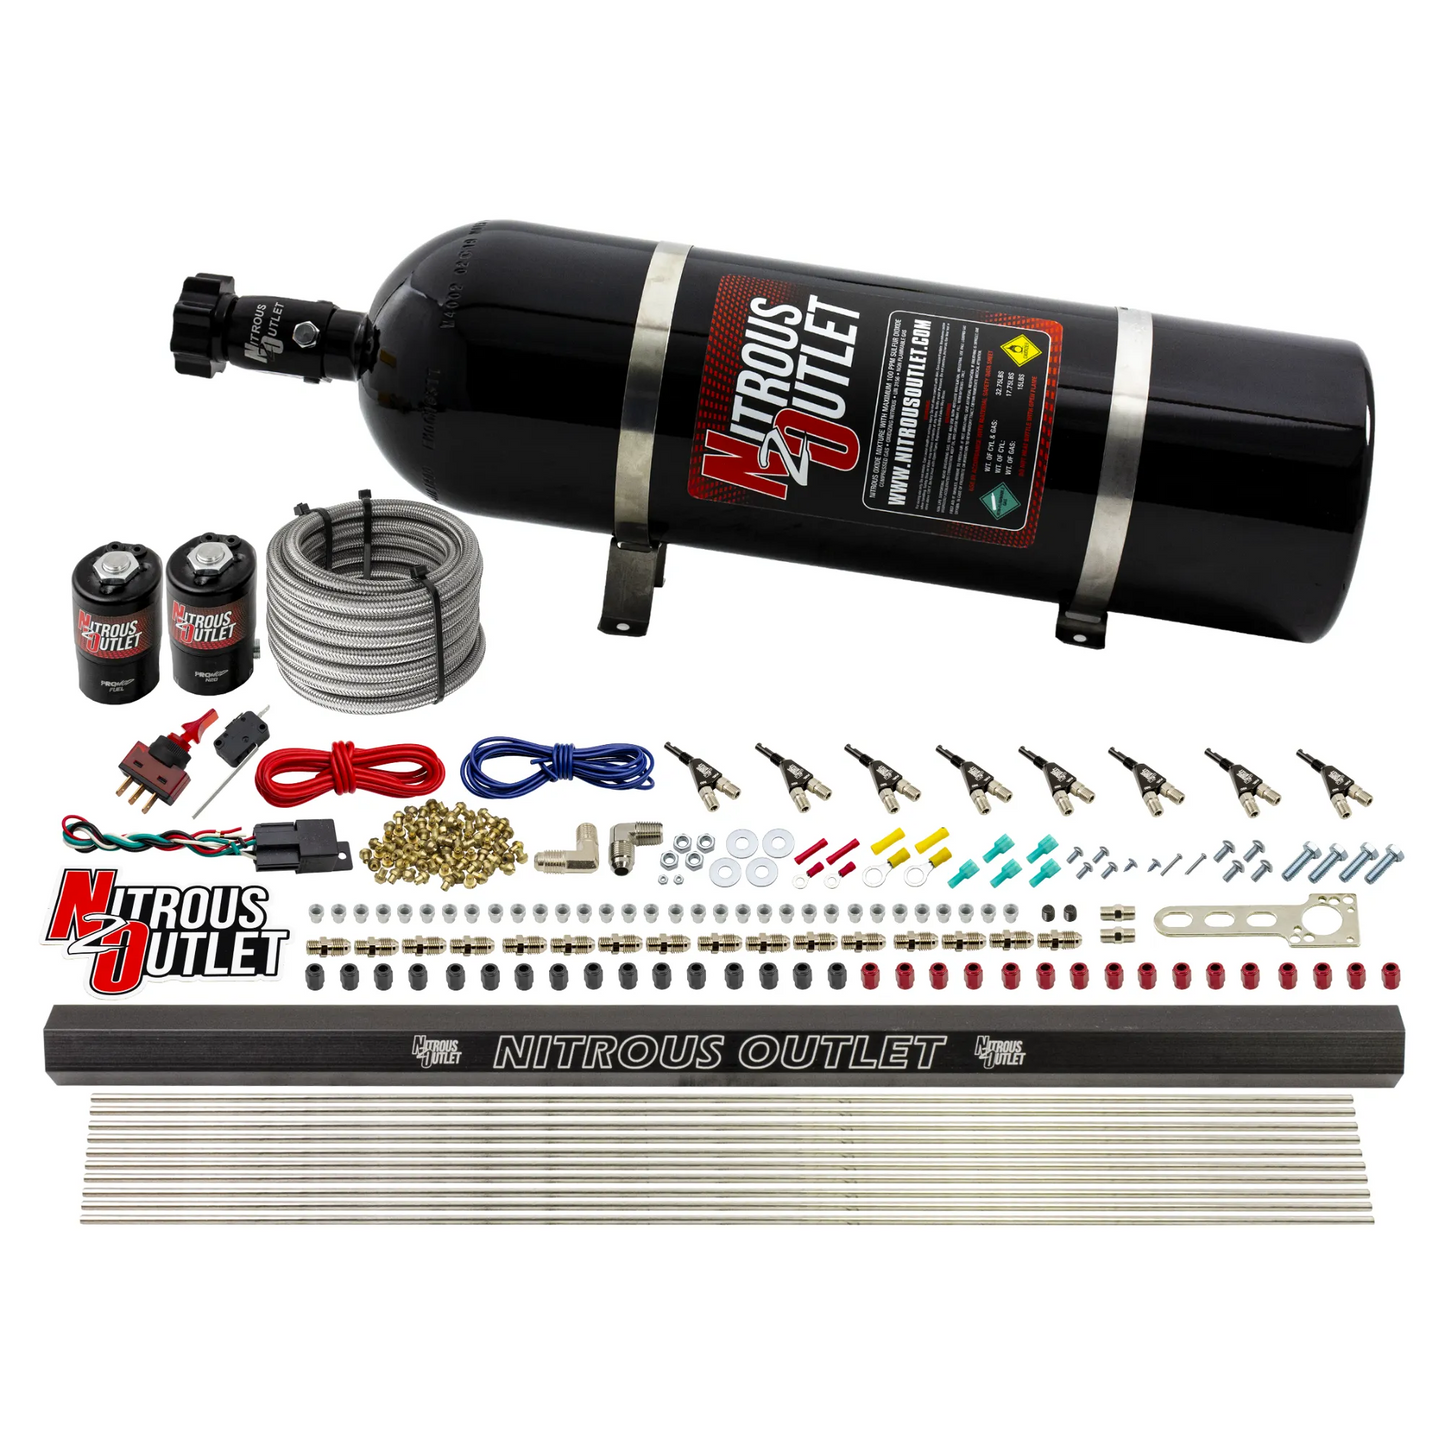 8 Cylinder Direct Port System With Single Injection Rail - .122 Nitrous/.310 Fuel - 90° Discharge Nozzles - 45-55 PSI - Gas